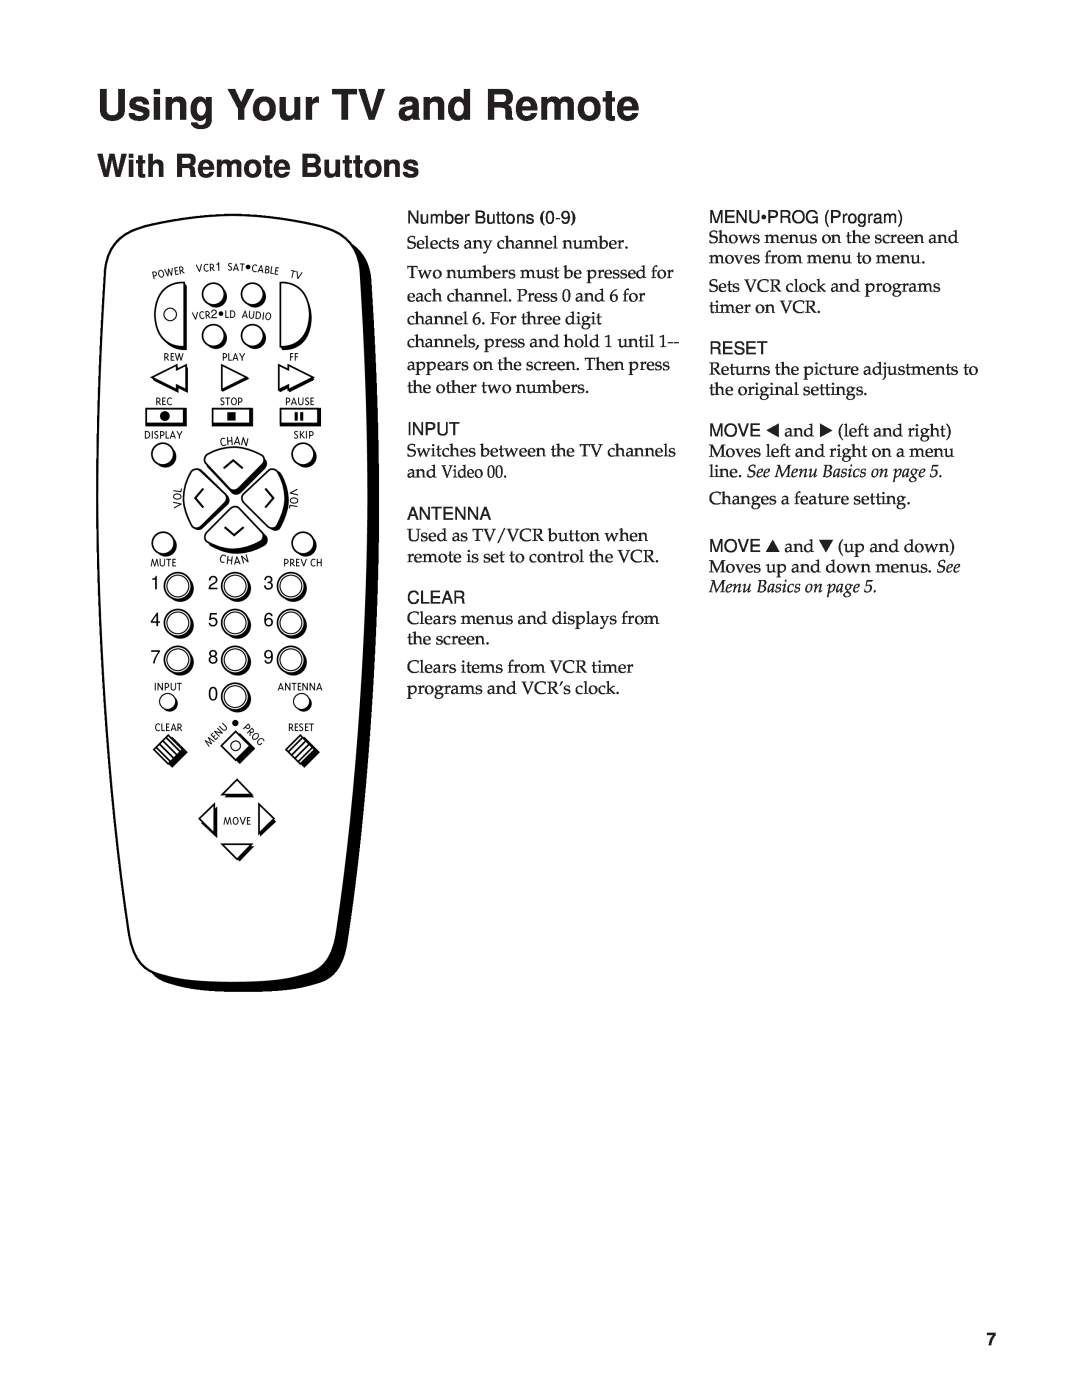 RCA RBA27500, 27000 manual Menu Basics on page, Using Your TV and Remote, With Remote Buttons 